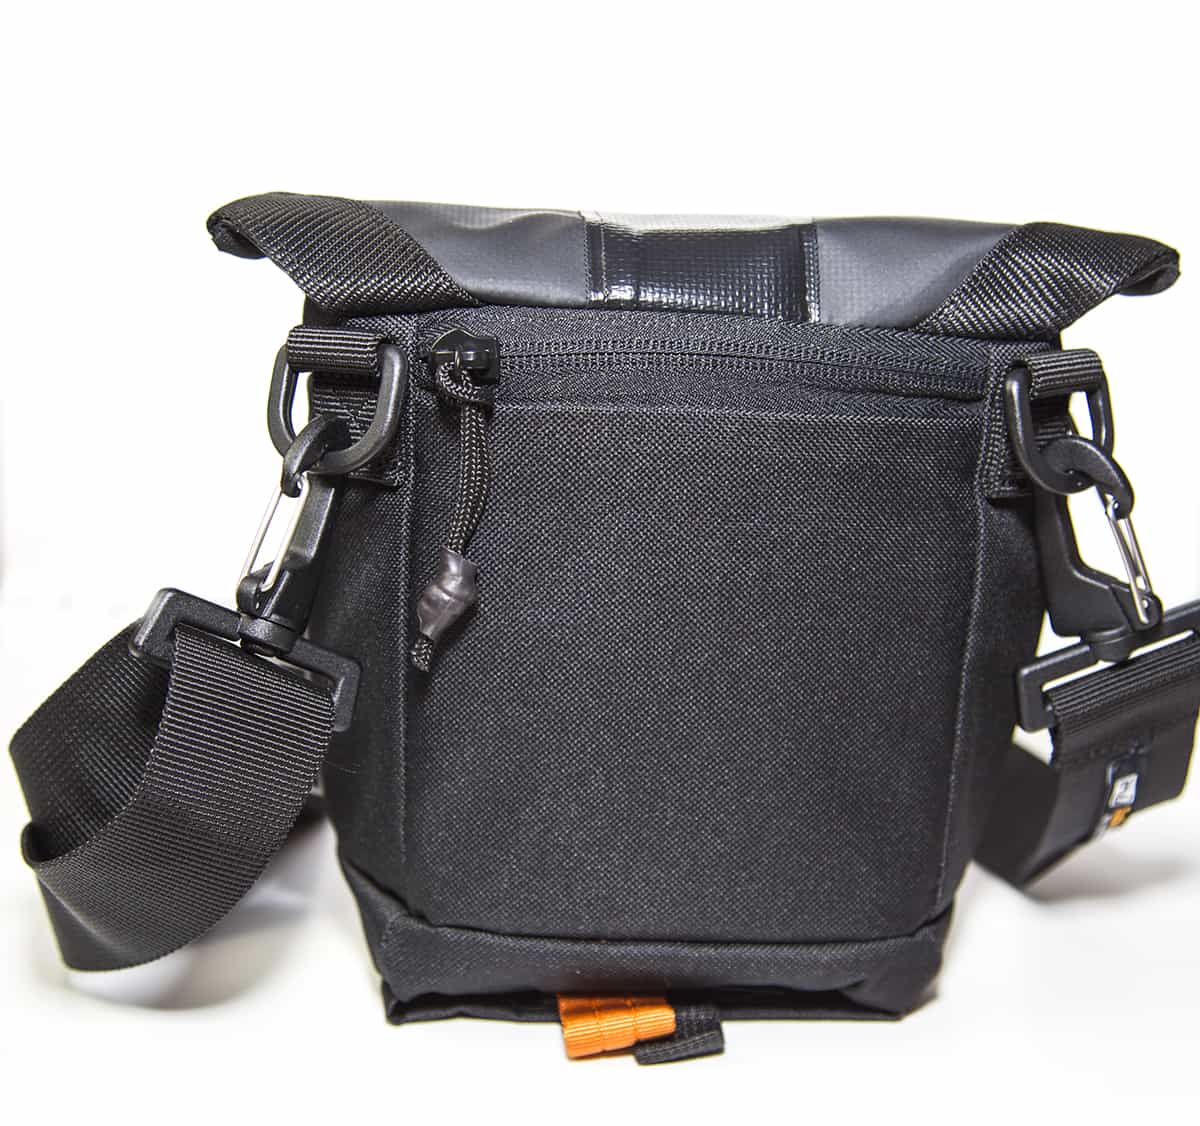 The 247 Holster Bag Review - f64 Academy